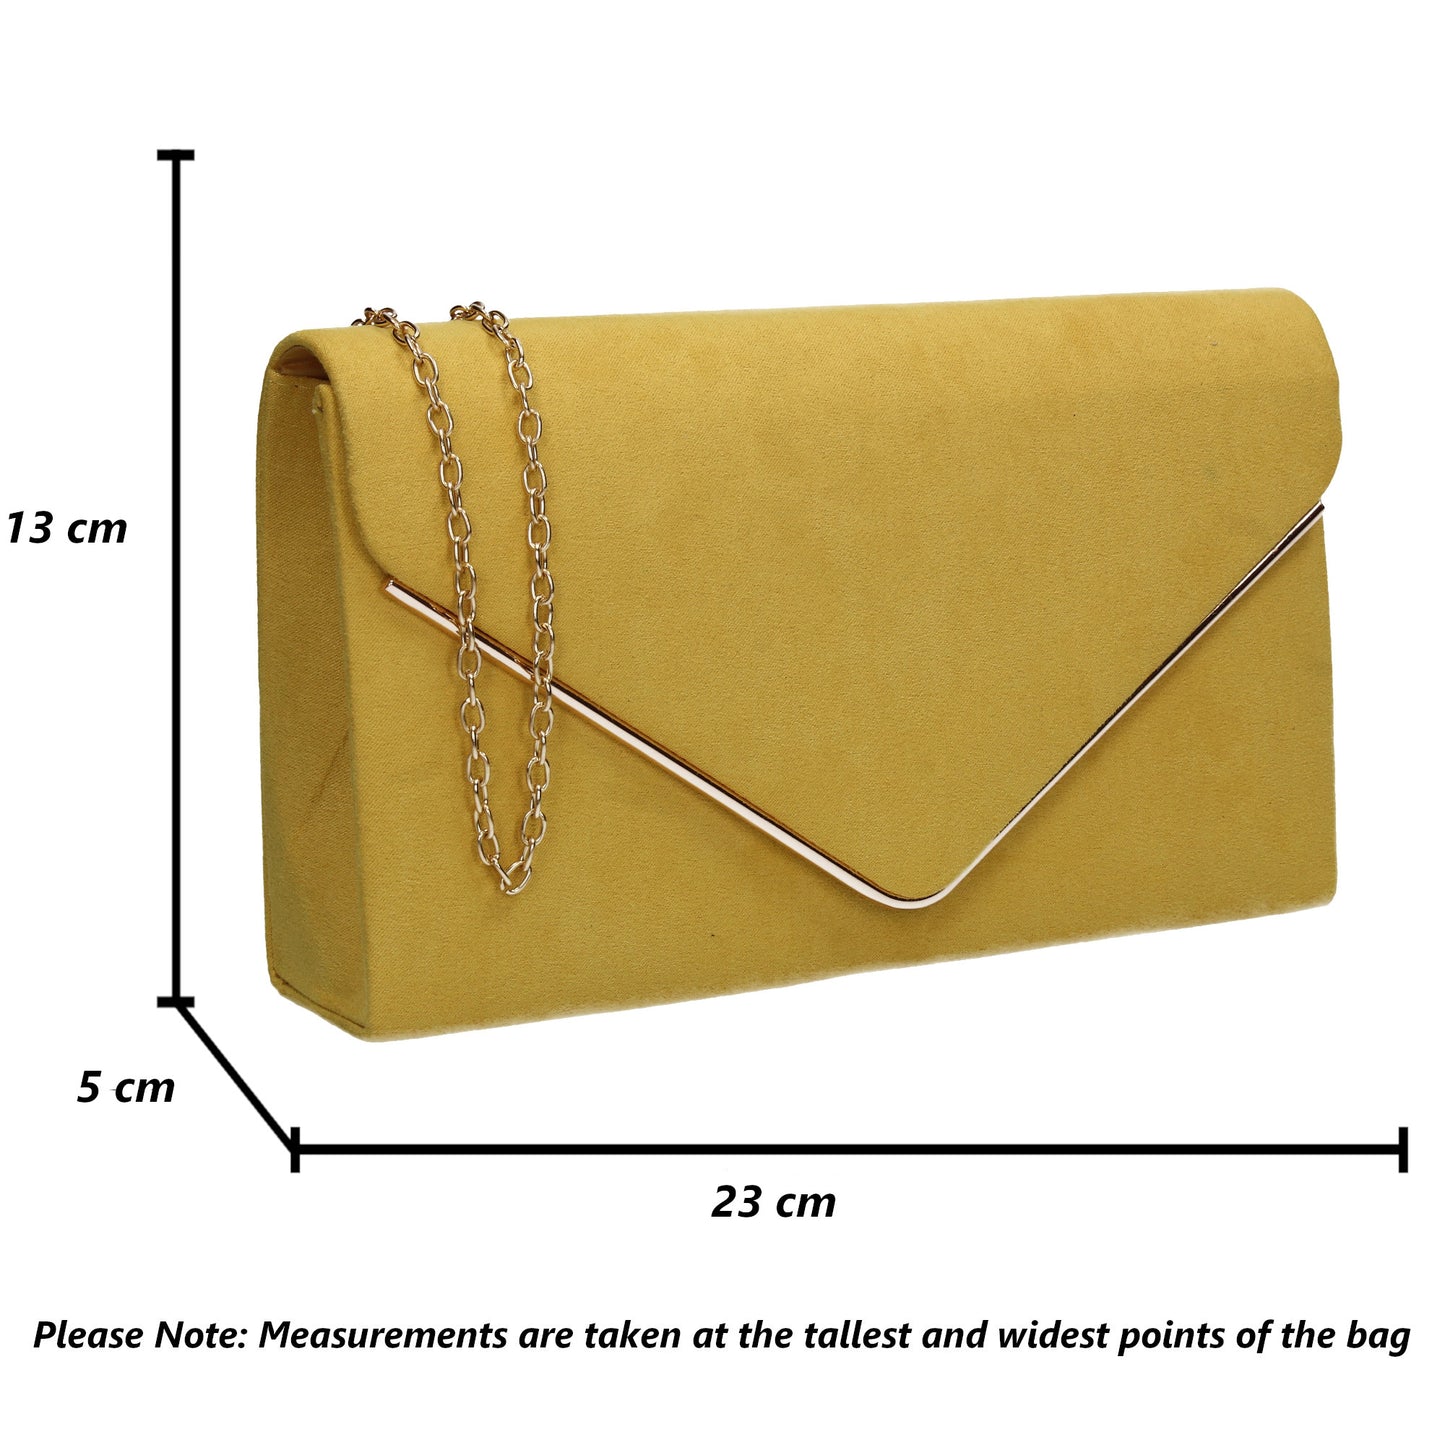 Poppy Faux Suede Envelope Clutch Bag Yellow